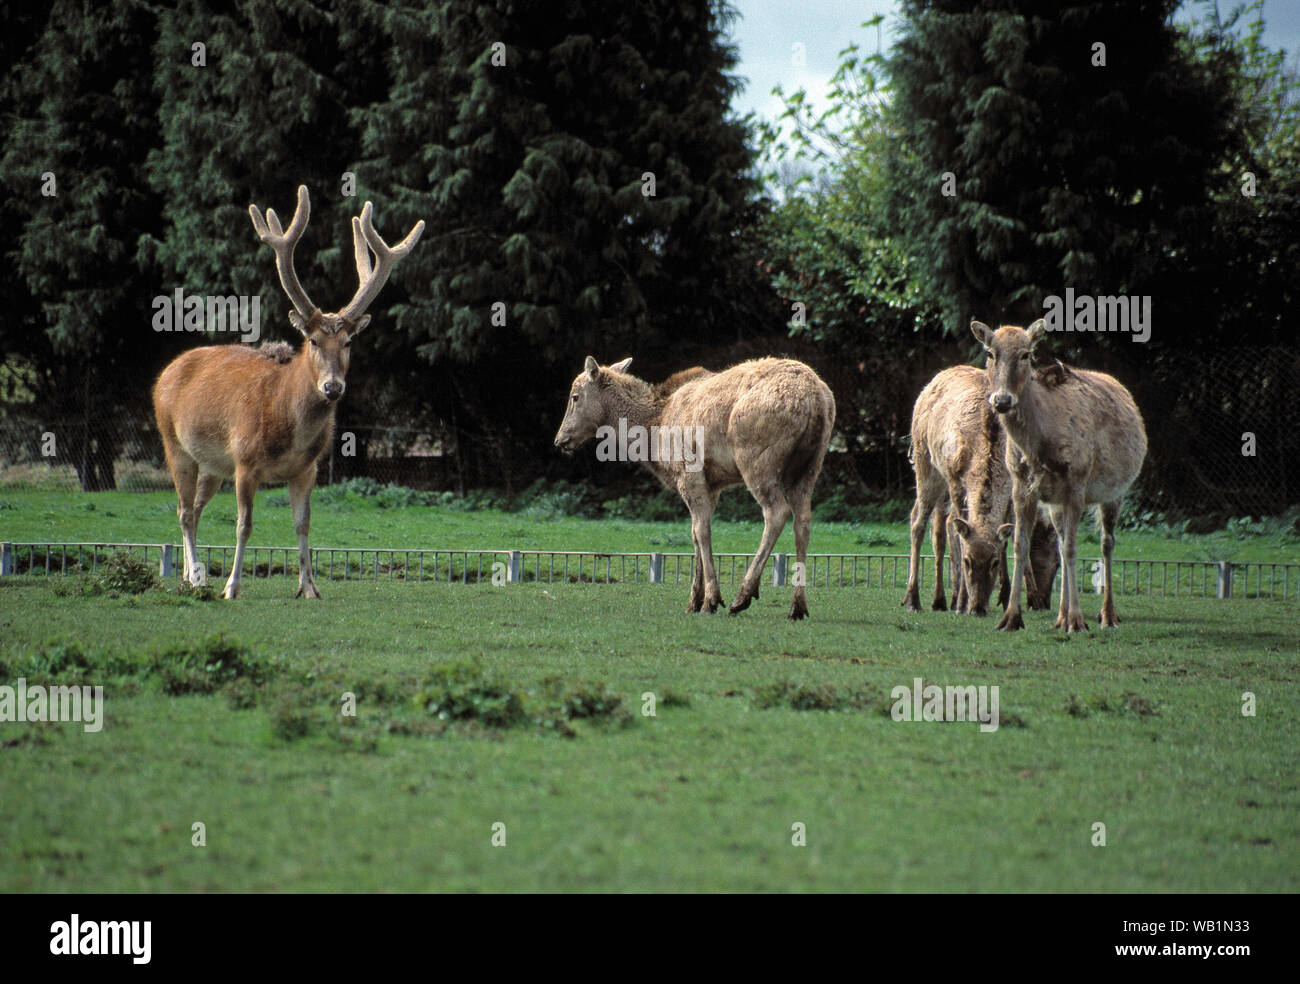 Pere David's Deer (Elaphurus davidianus). Extinct in the wild. Saved by captive breeding. Re-introduction to China. Note sunken, ha-ha, hidden enclosure fence line. Chester Zoo. The UK. Stock Photo